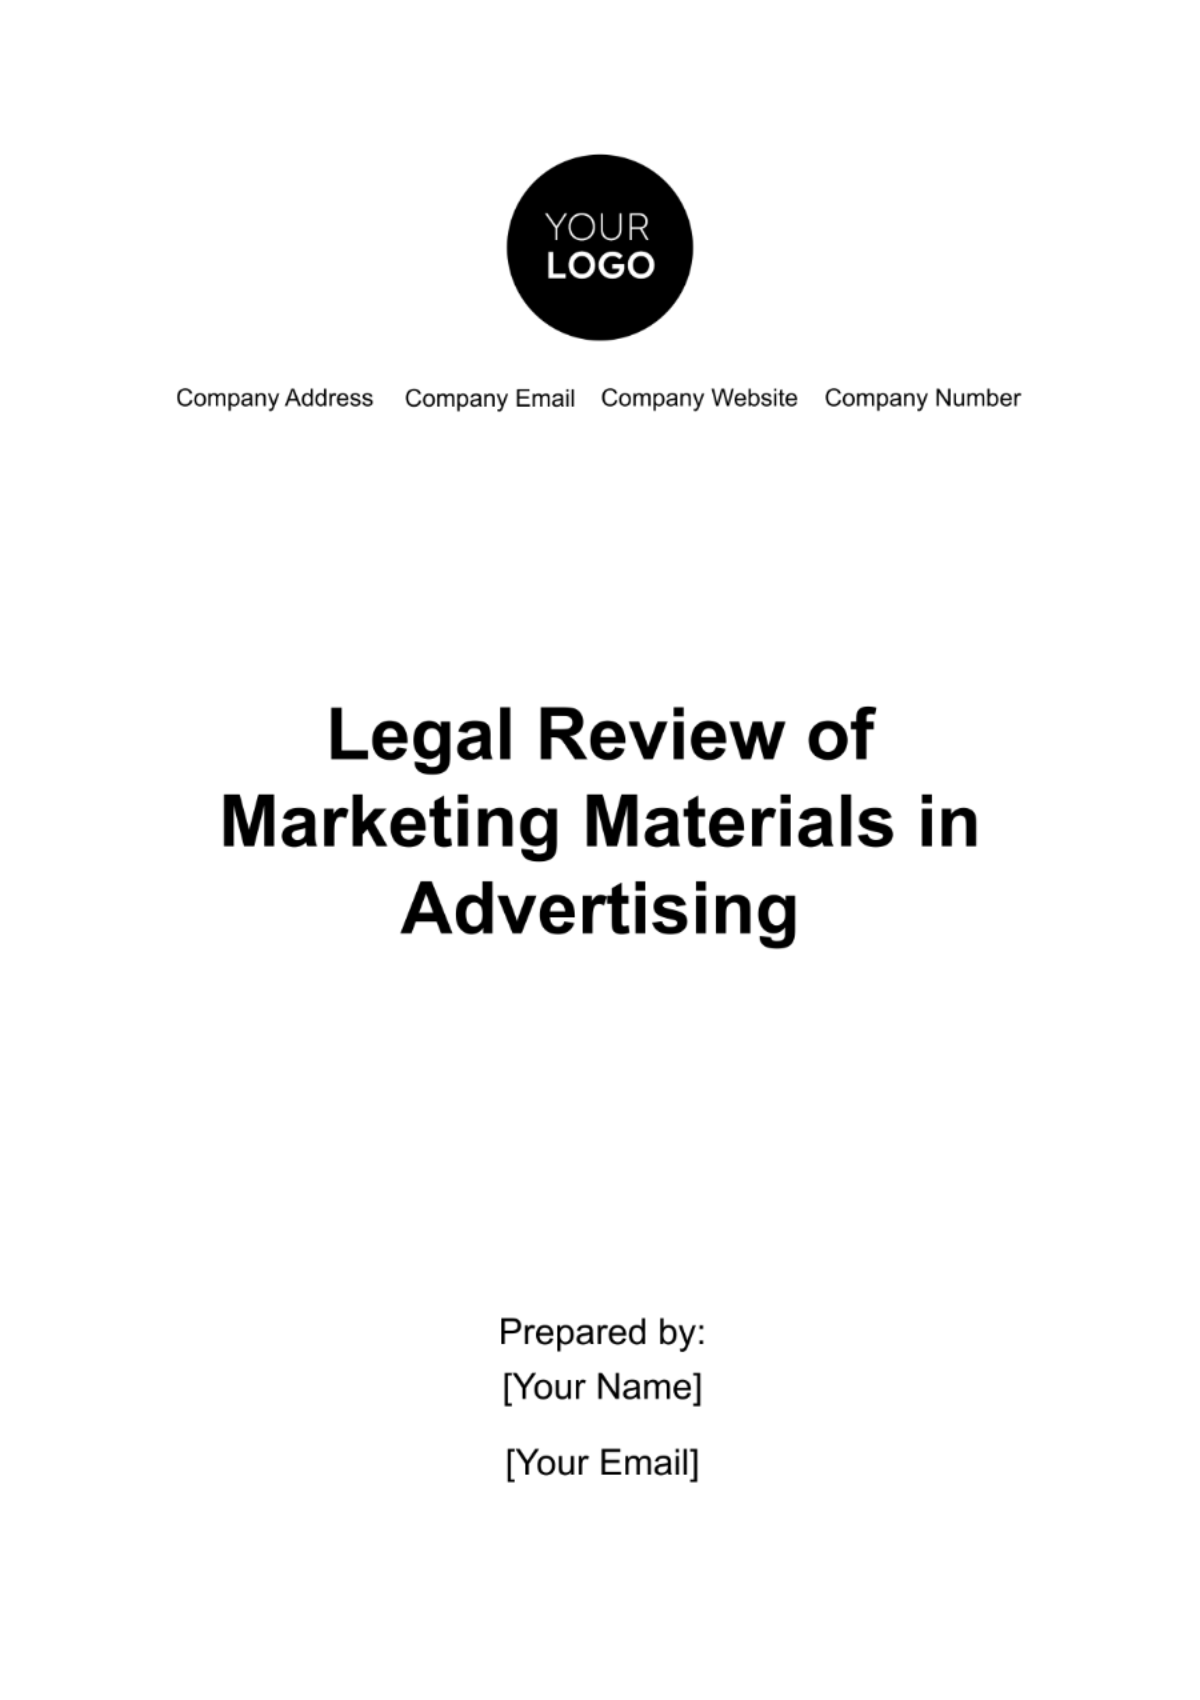 Free Legal Review of Marketing Materials in Advertising Template